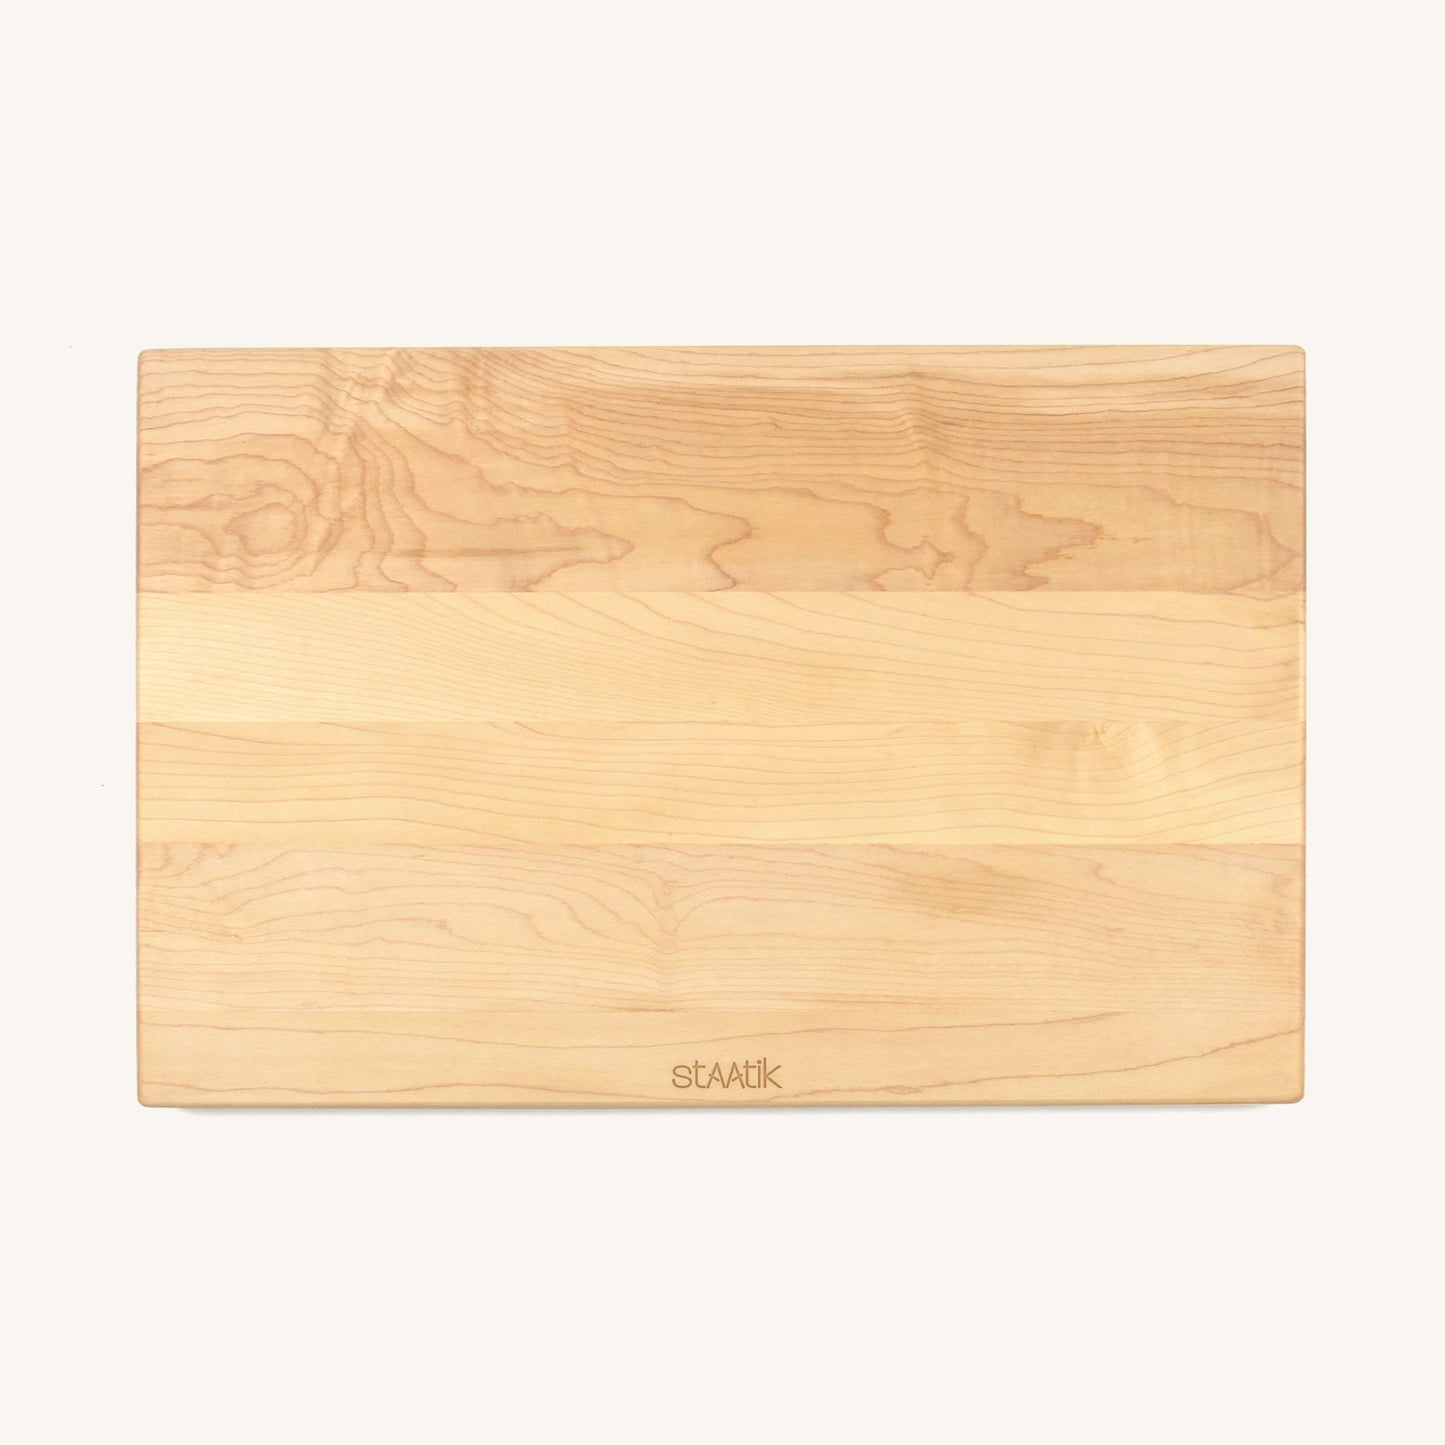 Regular Cutting Board with Rounded Corners and Edges